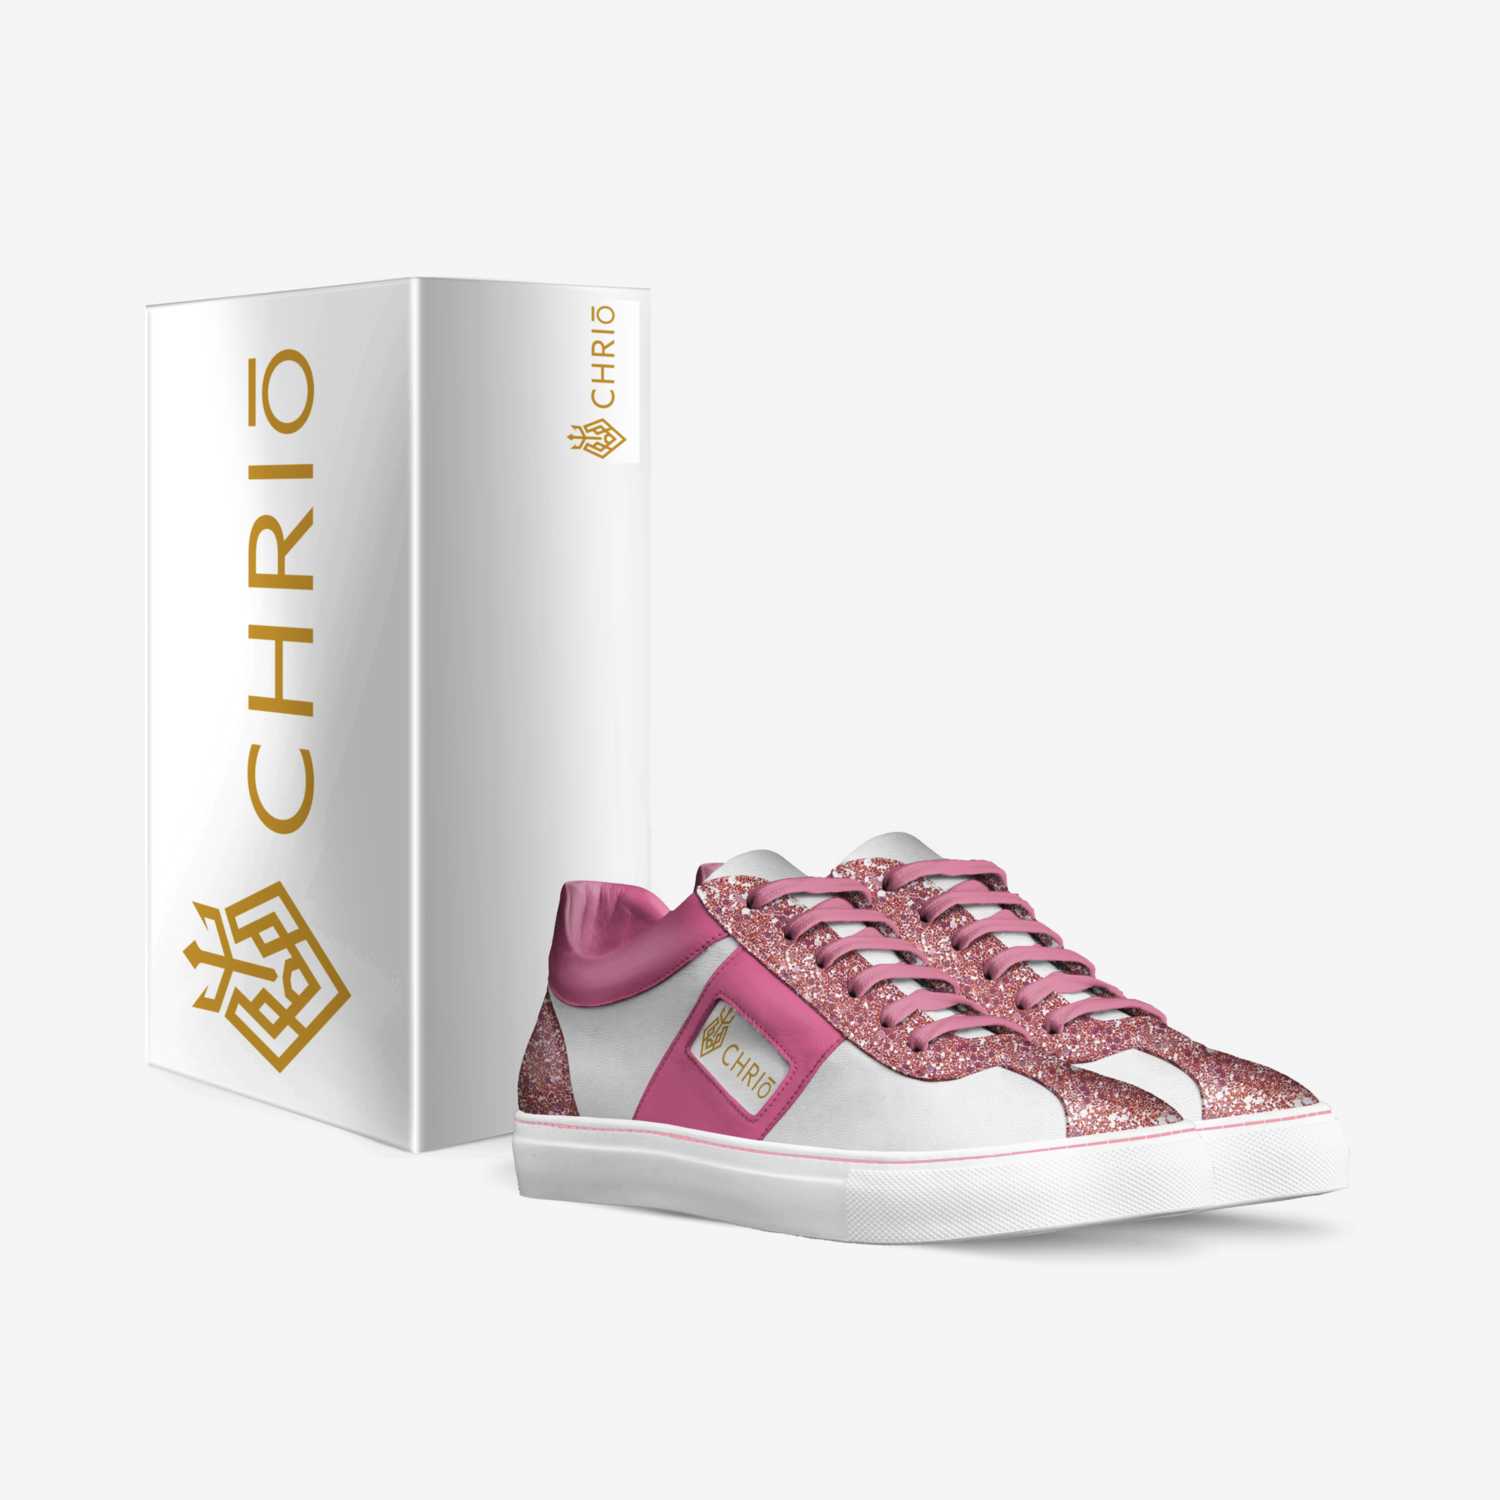 CHRIō custom made in Italy shoes by Hakeem Collins | Box view